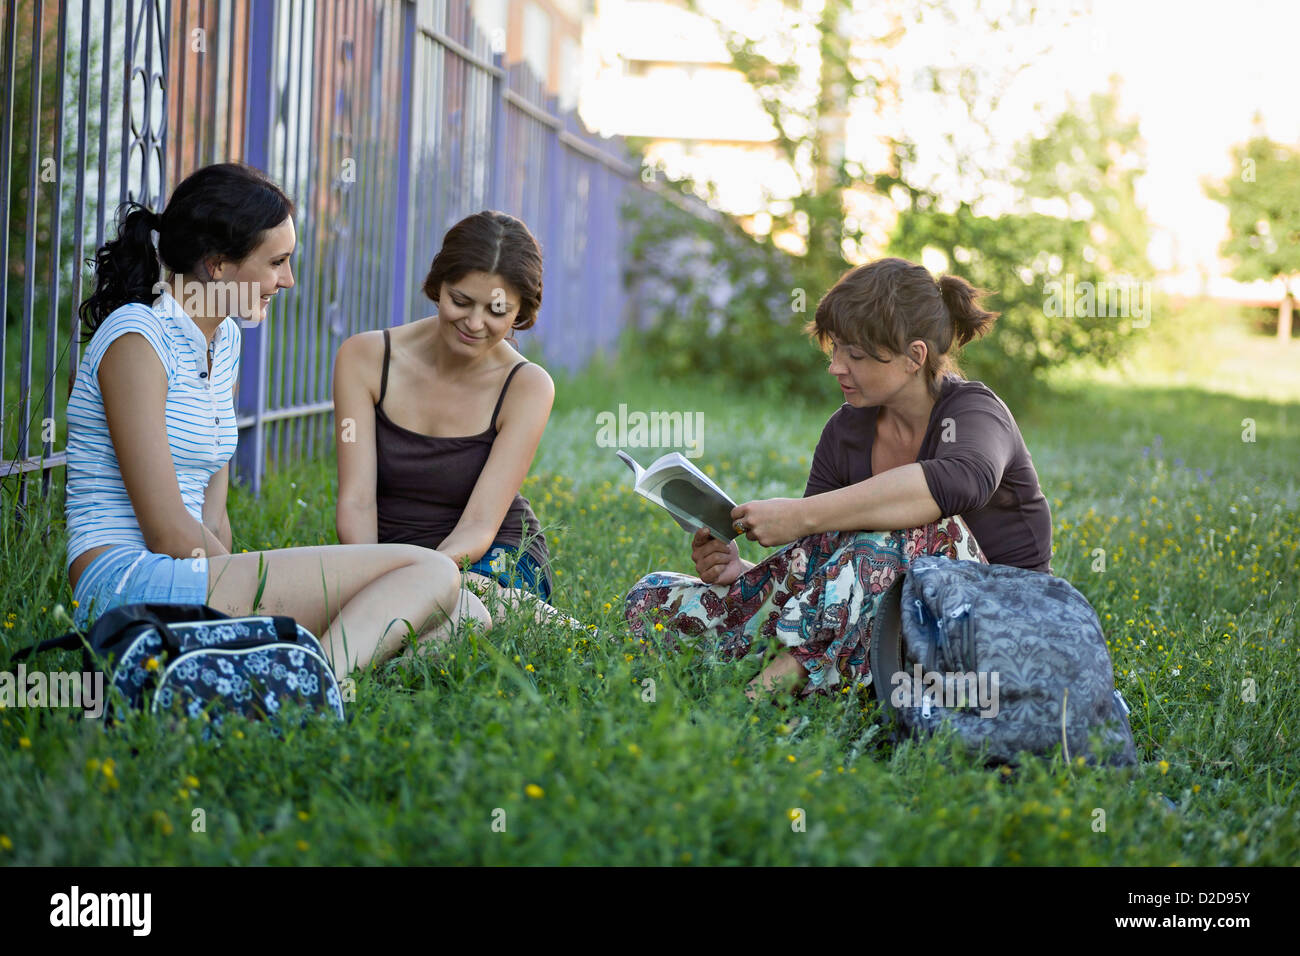 Two friends in a park listening to their friend read from a book Stock Photo